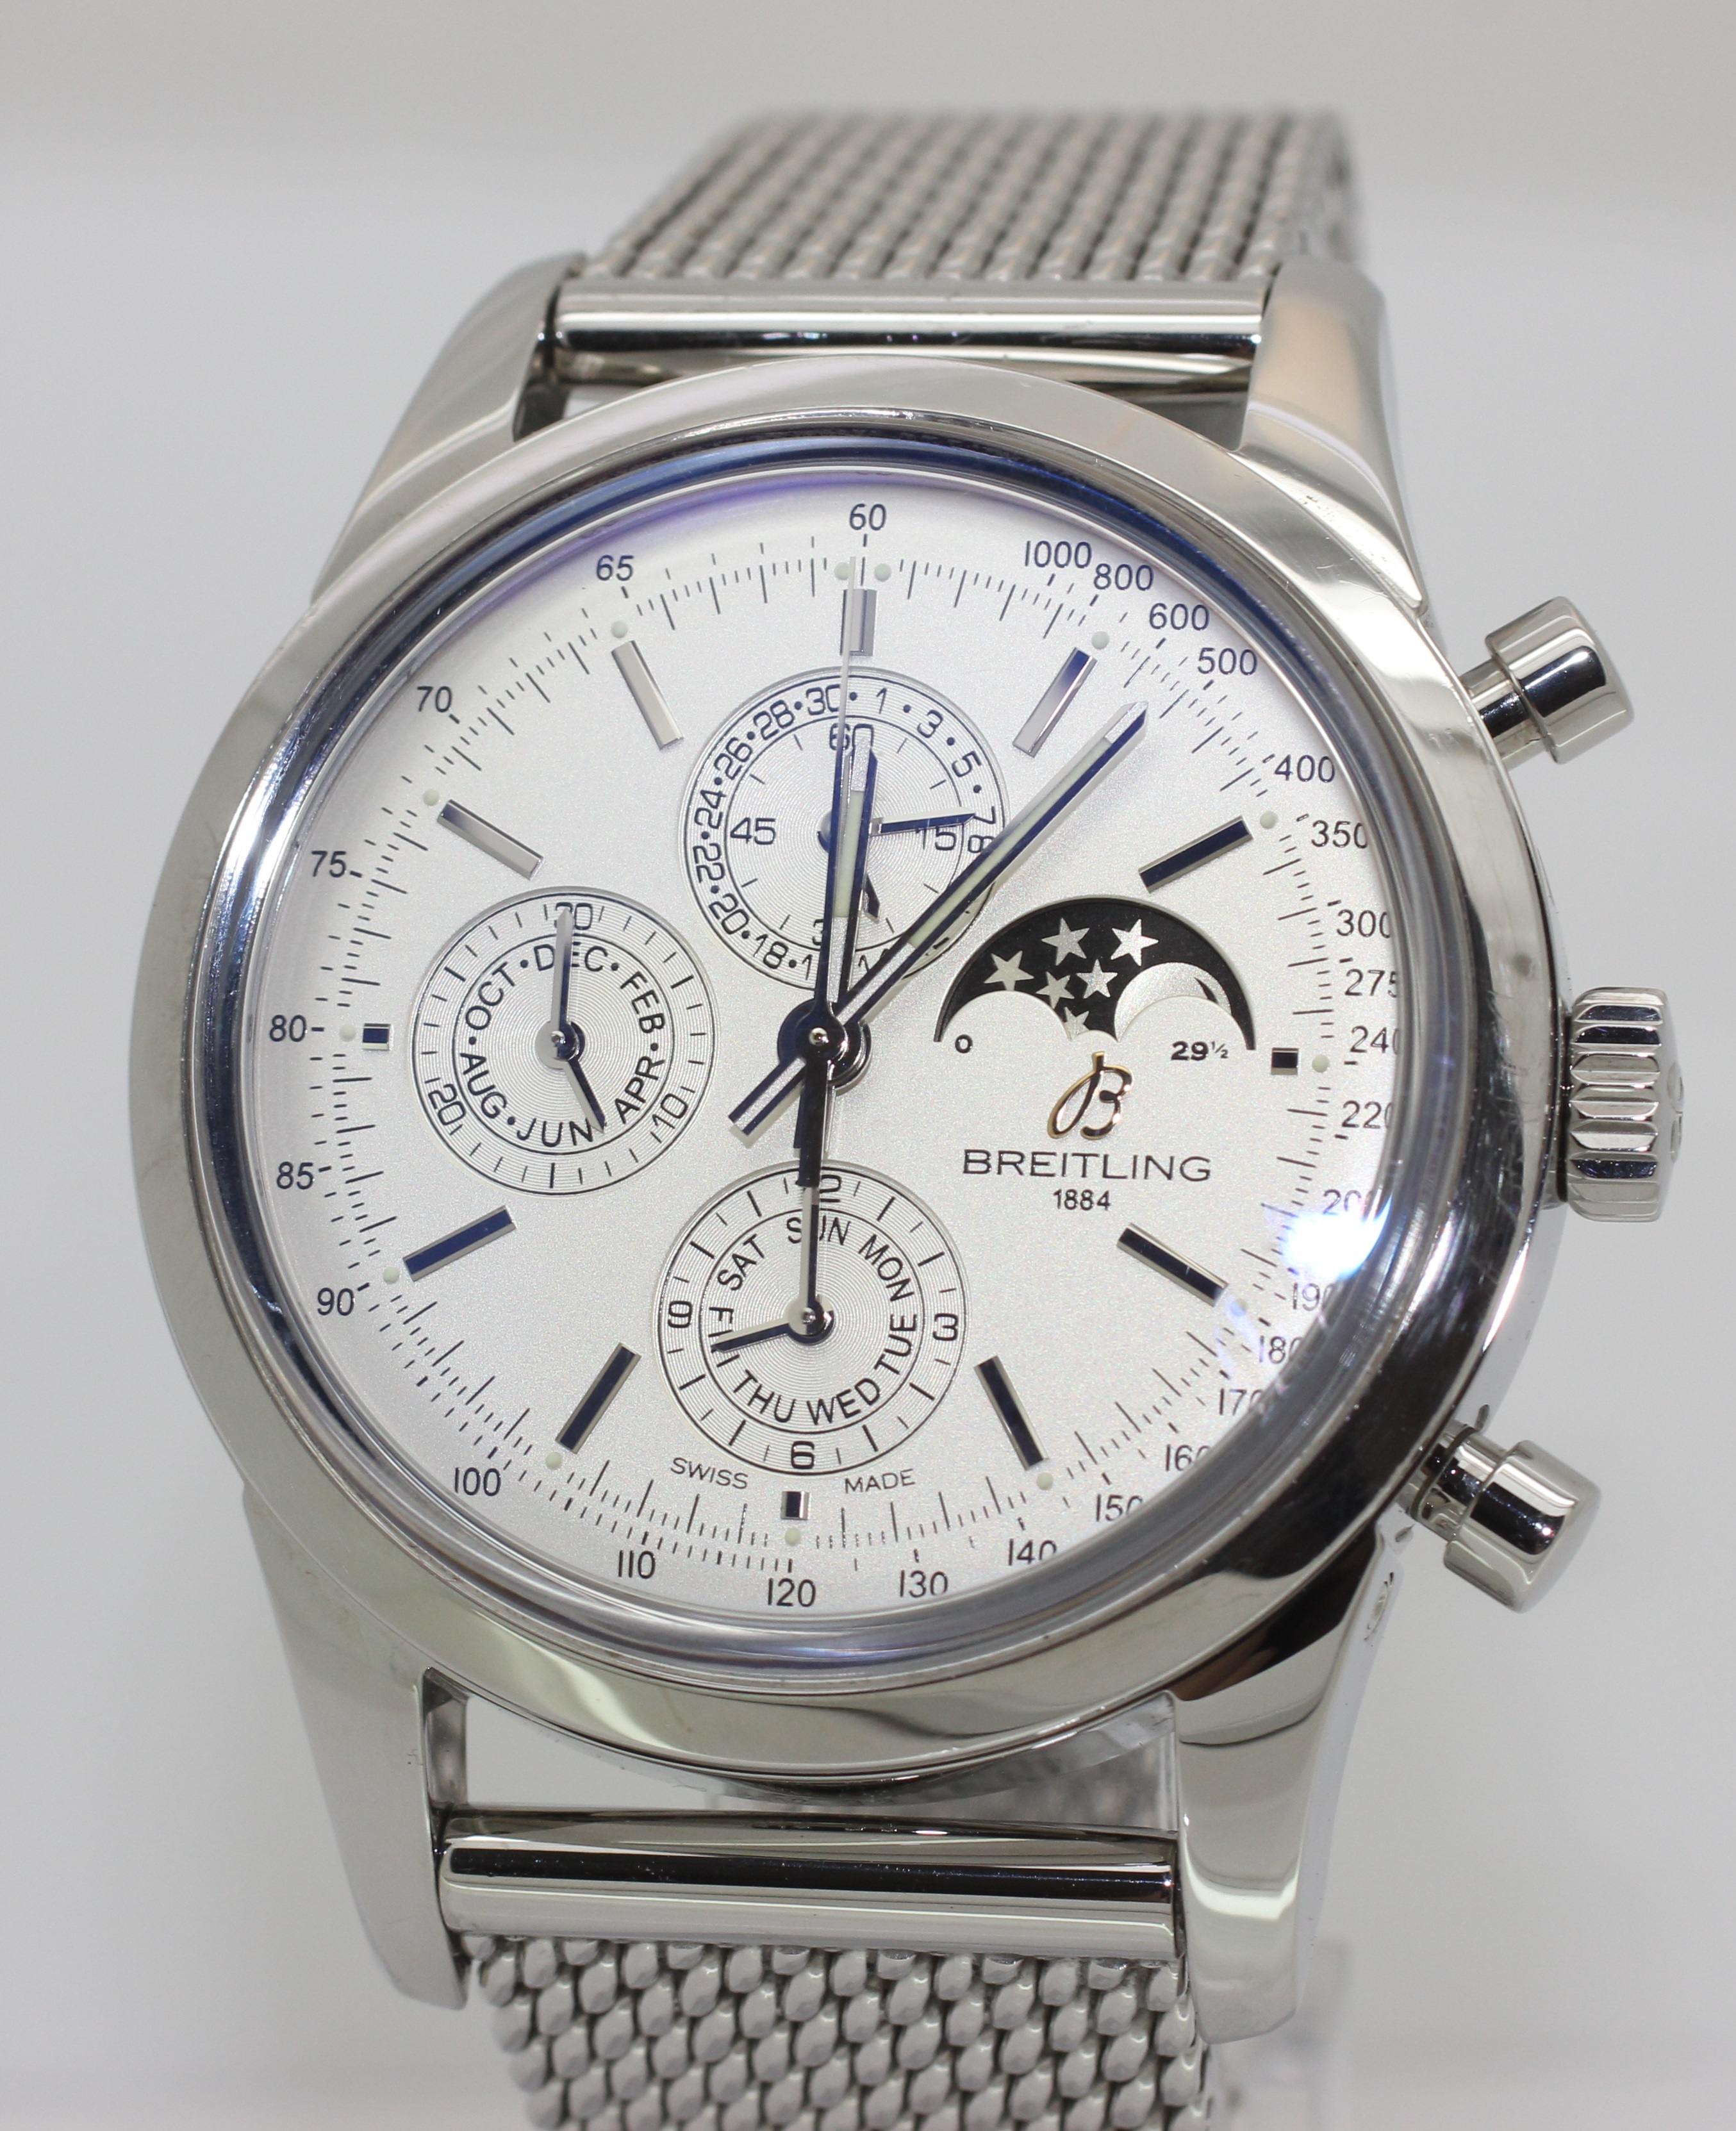 2012 Stainless Steel Breitling Transocean 1461 Chronograph A19310 - Box & Papers